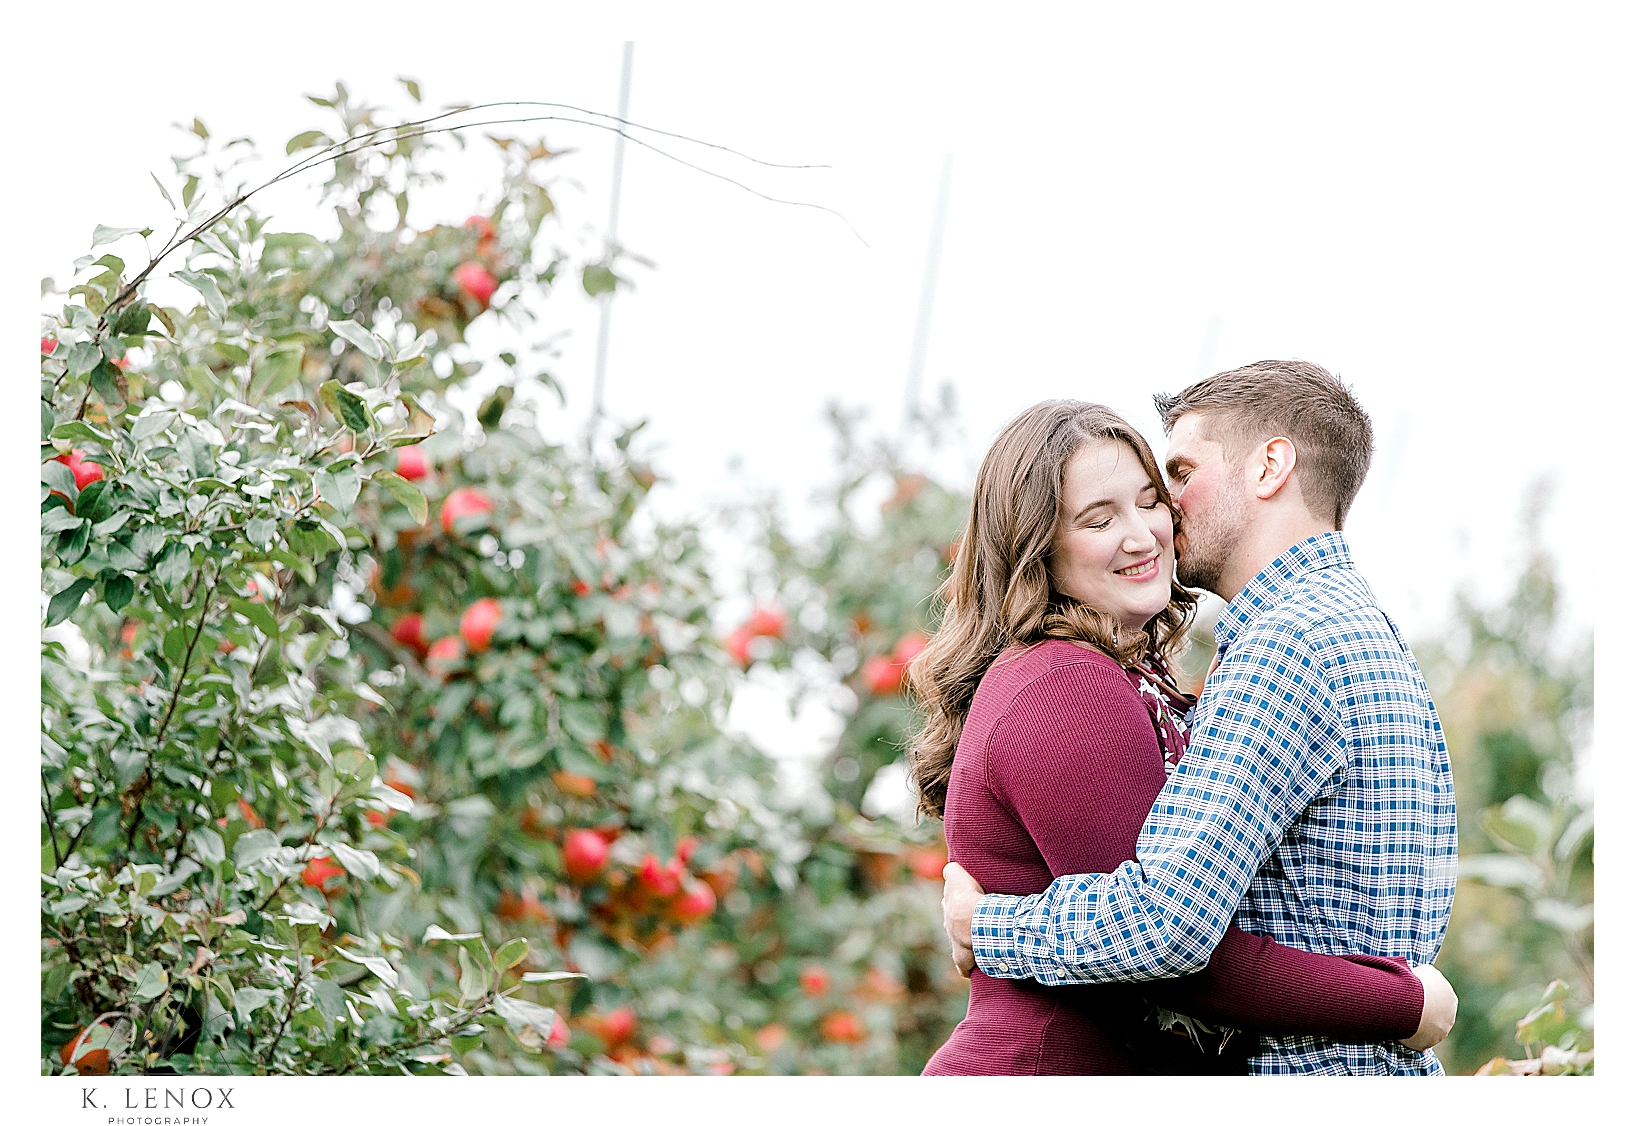 Fall Engagement Session in the Orchard • K. Lenox Photography